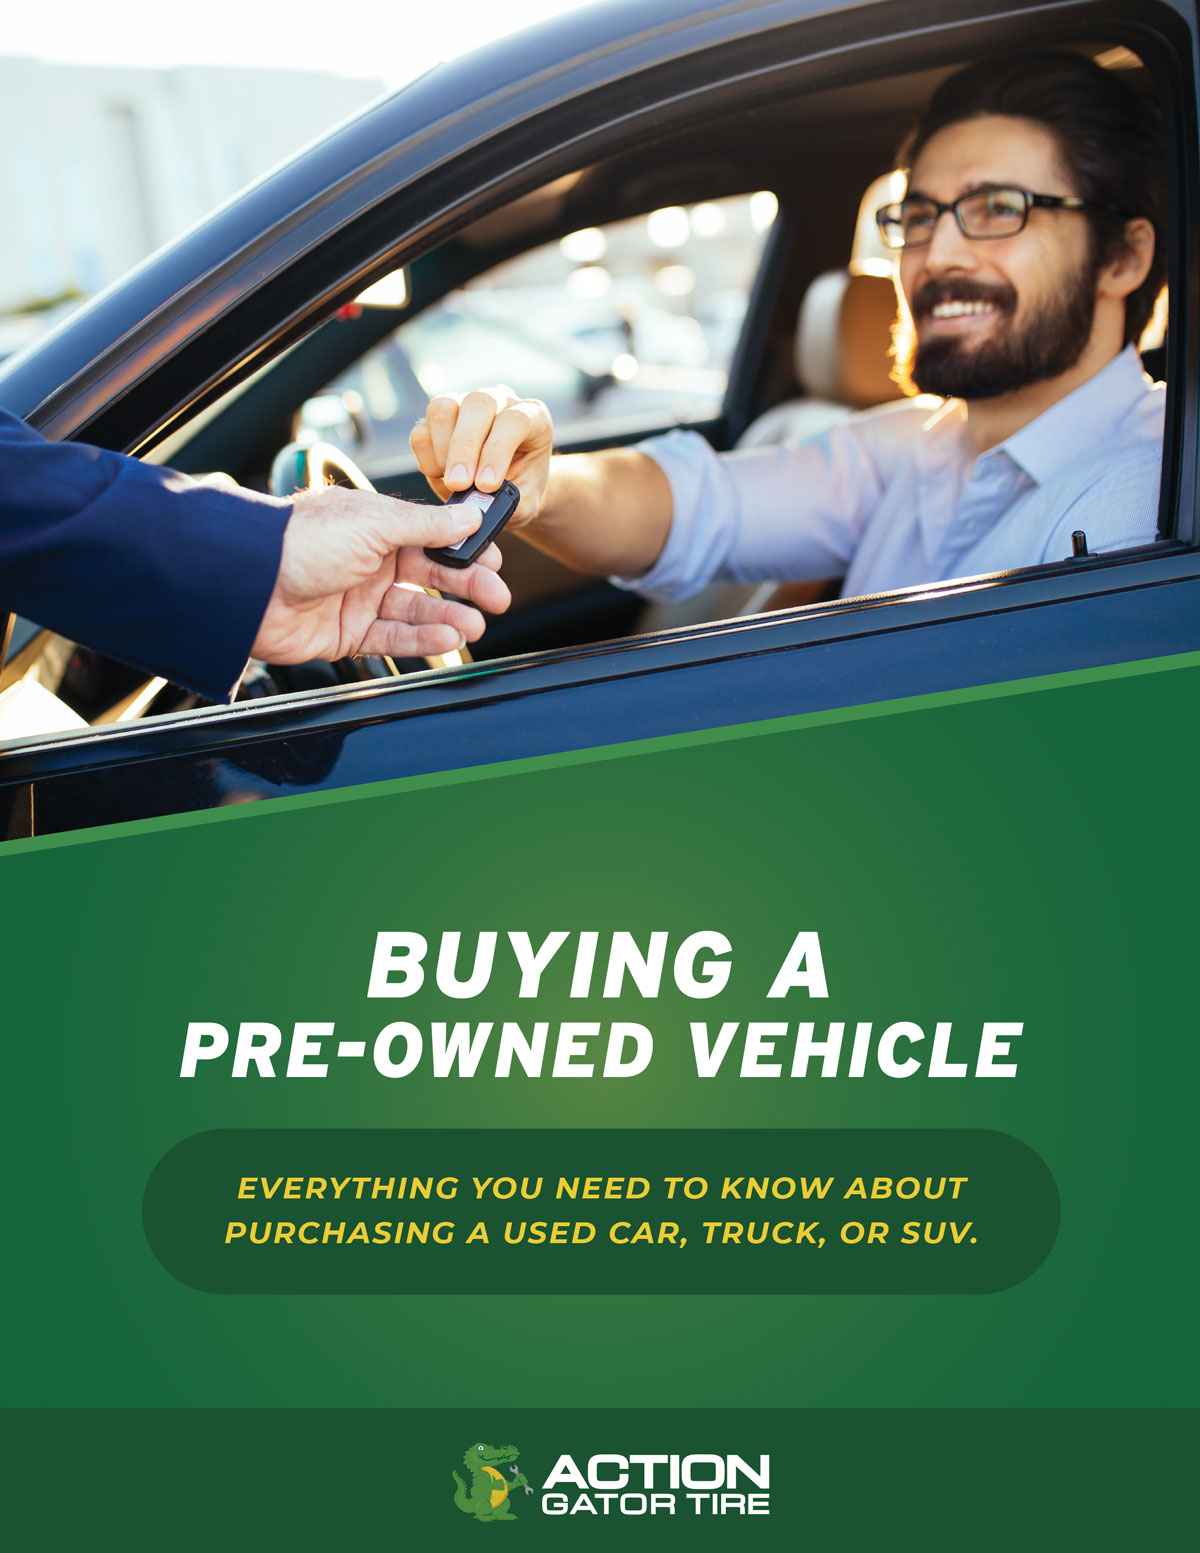 Buying a Pre-Owned Vehicle Guide